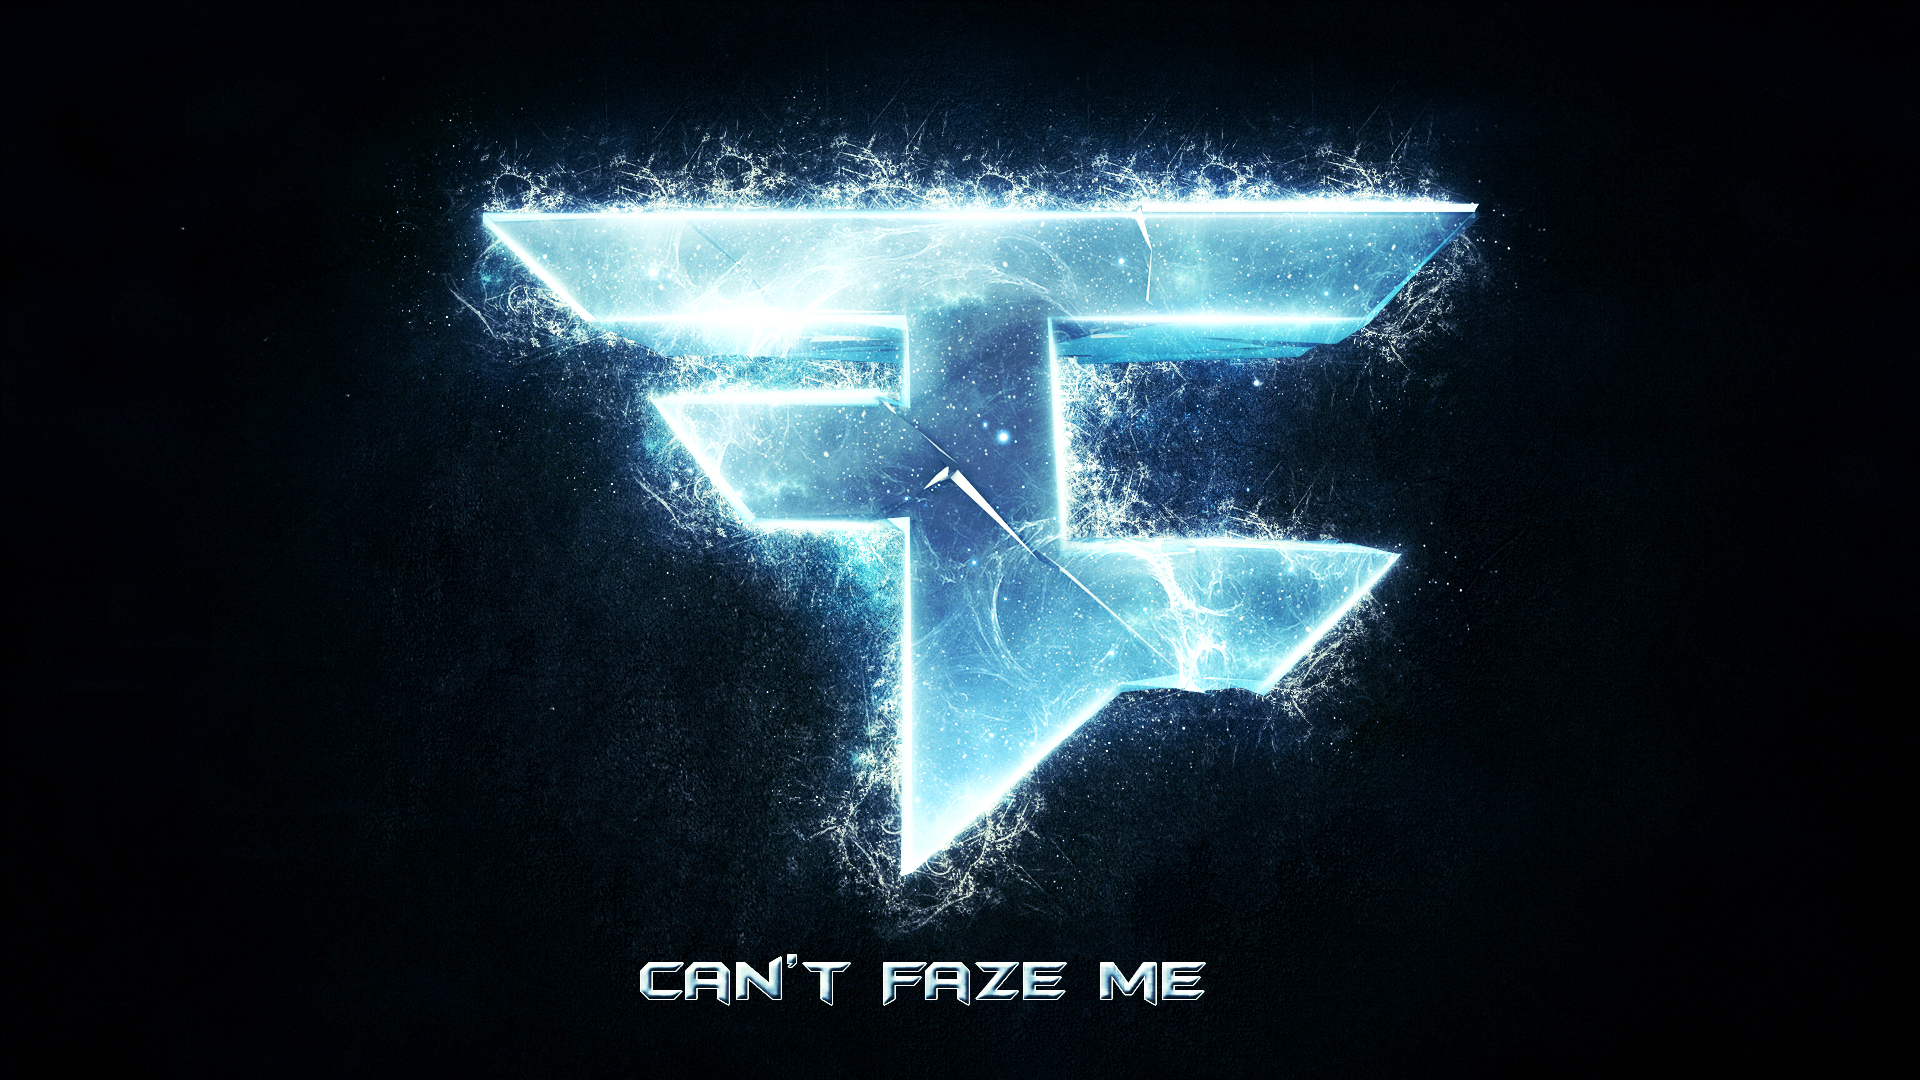  download wallpapers optic gaming displaying images for faze wallpaper 1920x1080